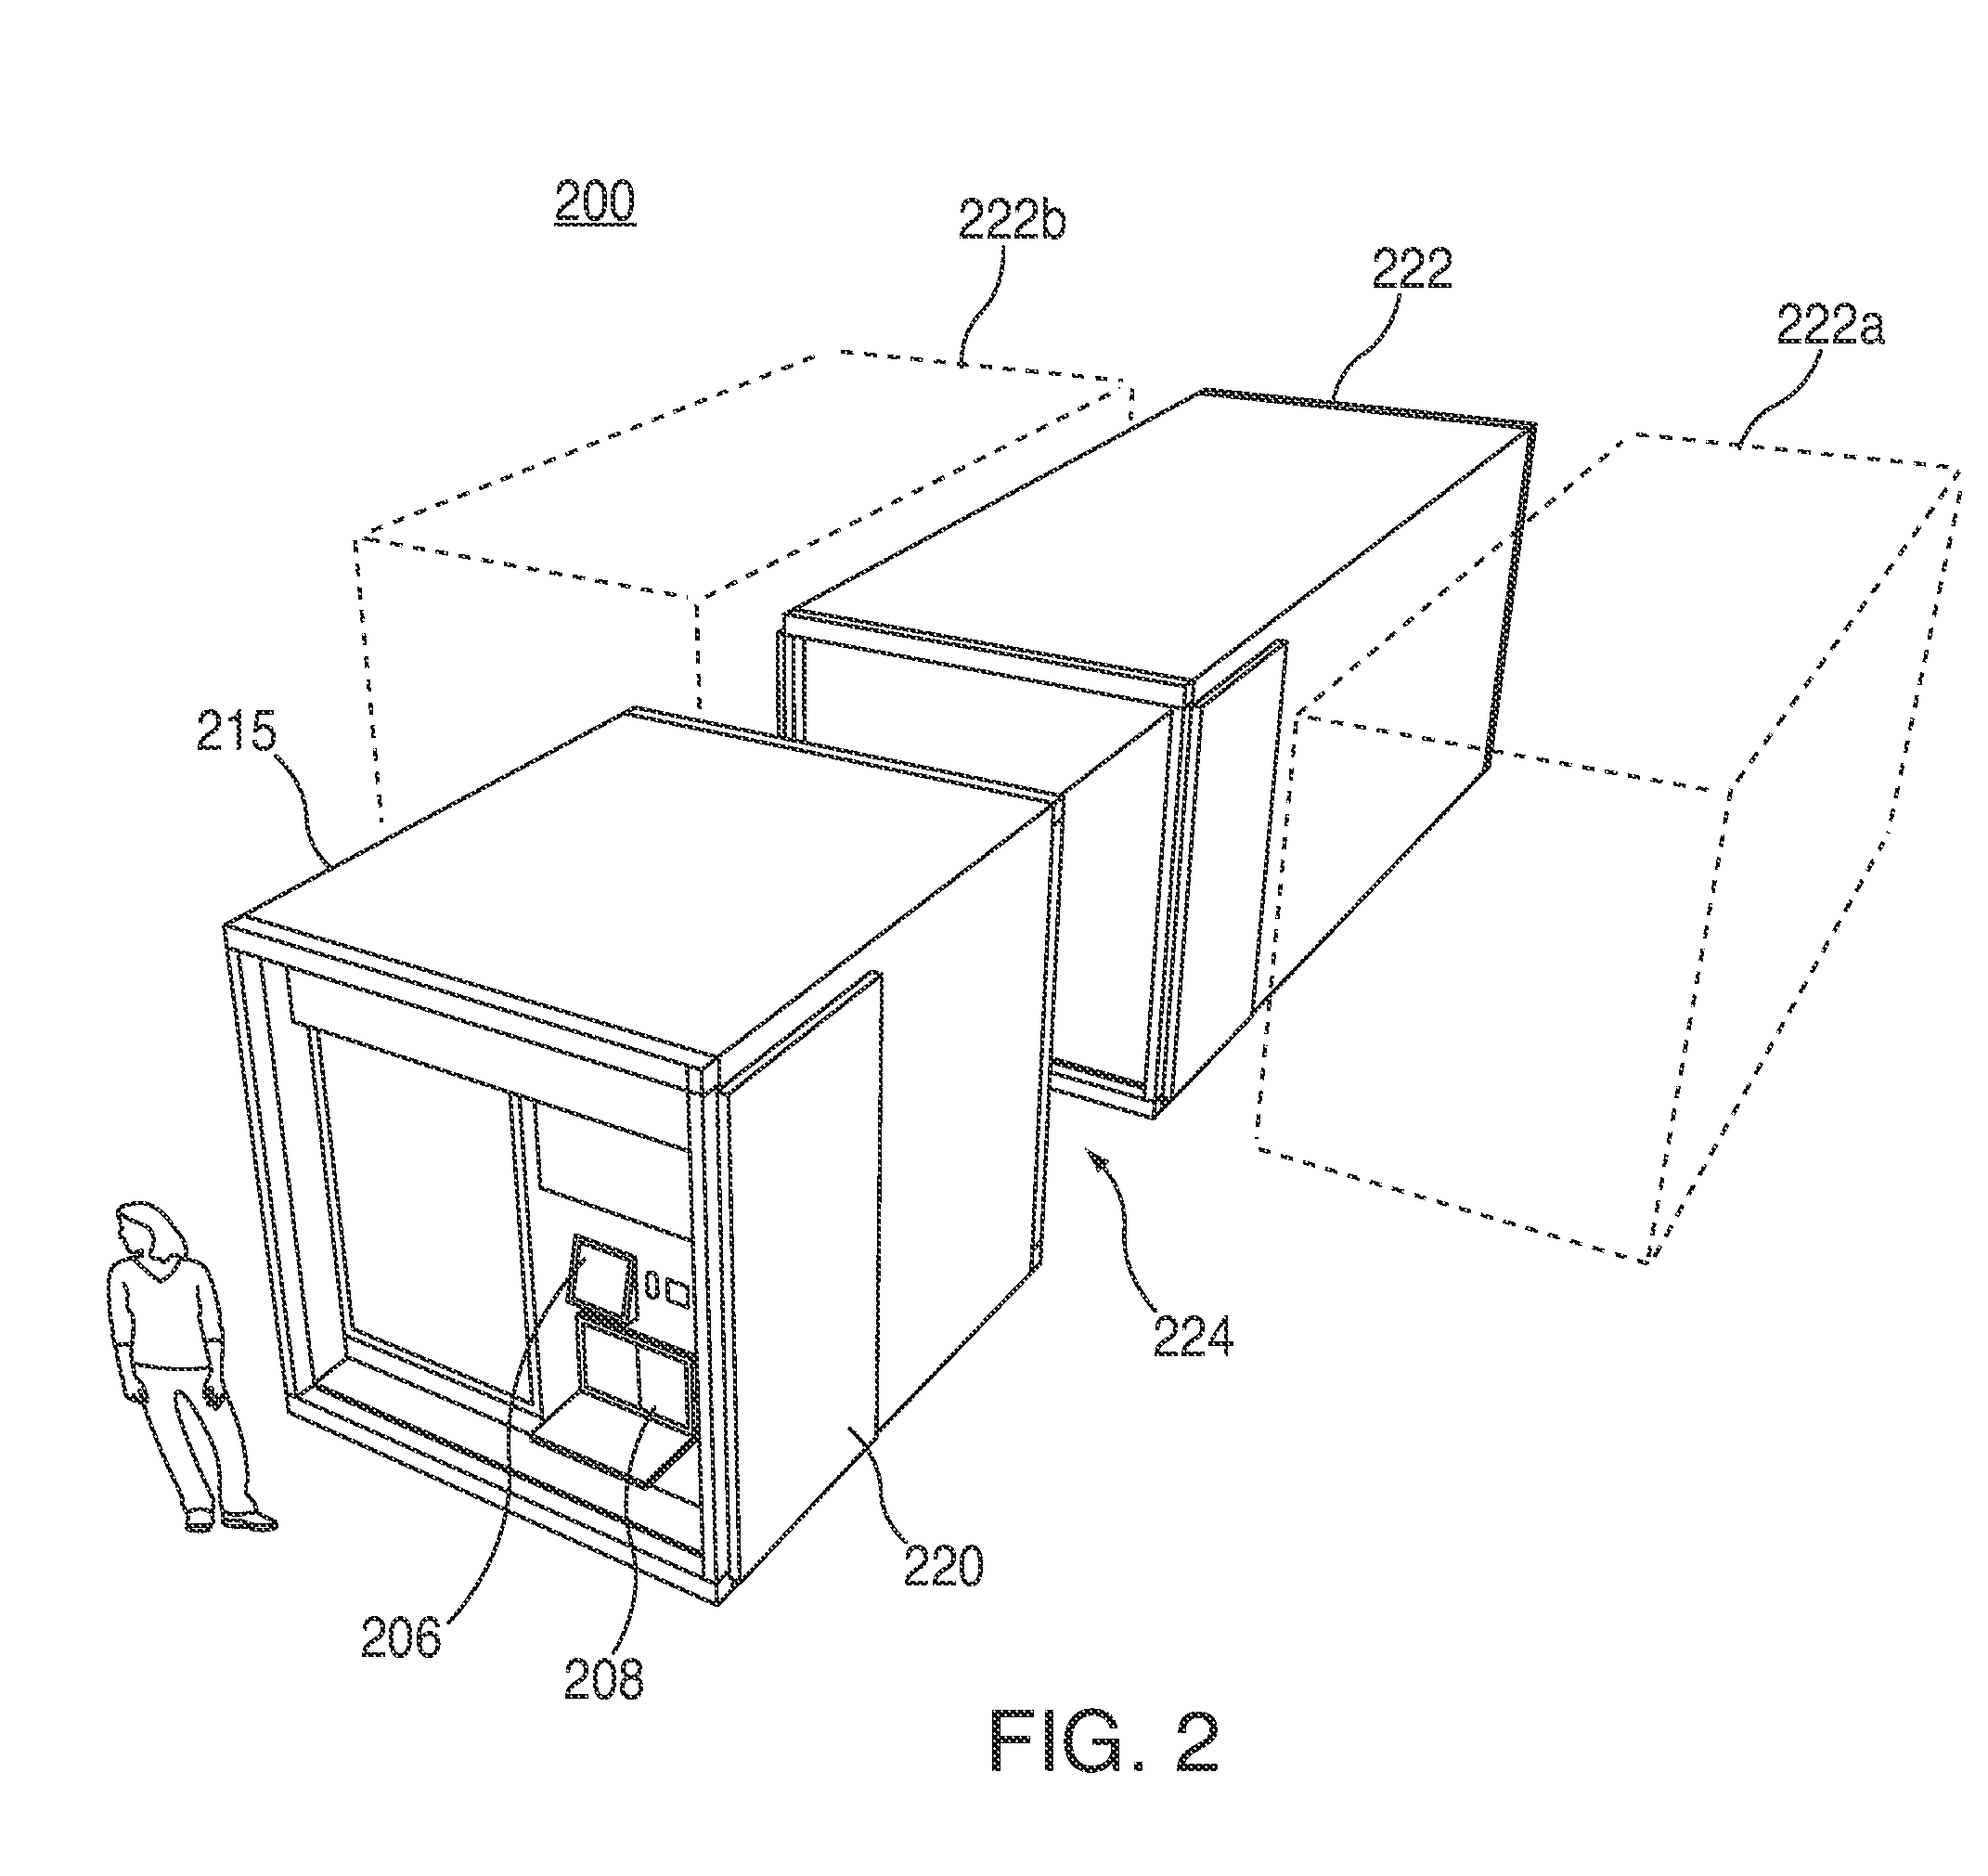 Apparatus, systems and methods for providing portable storage for multiple users